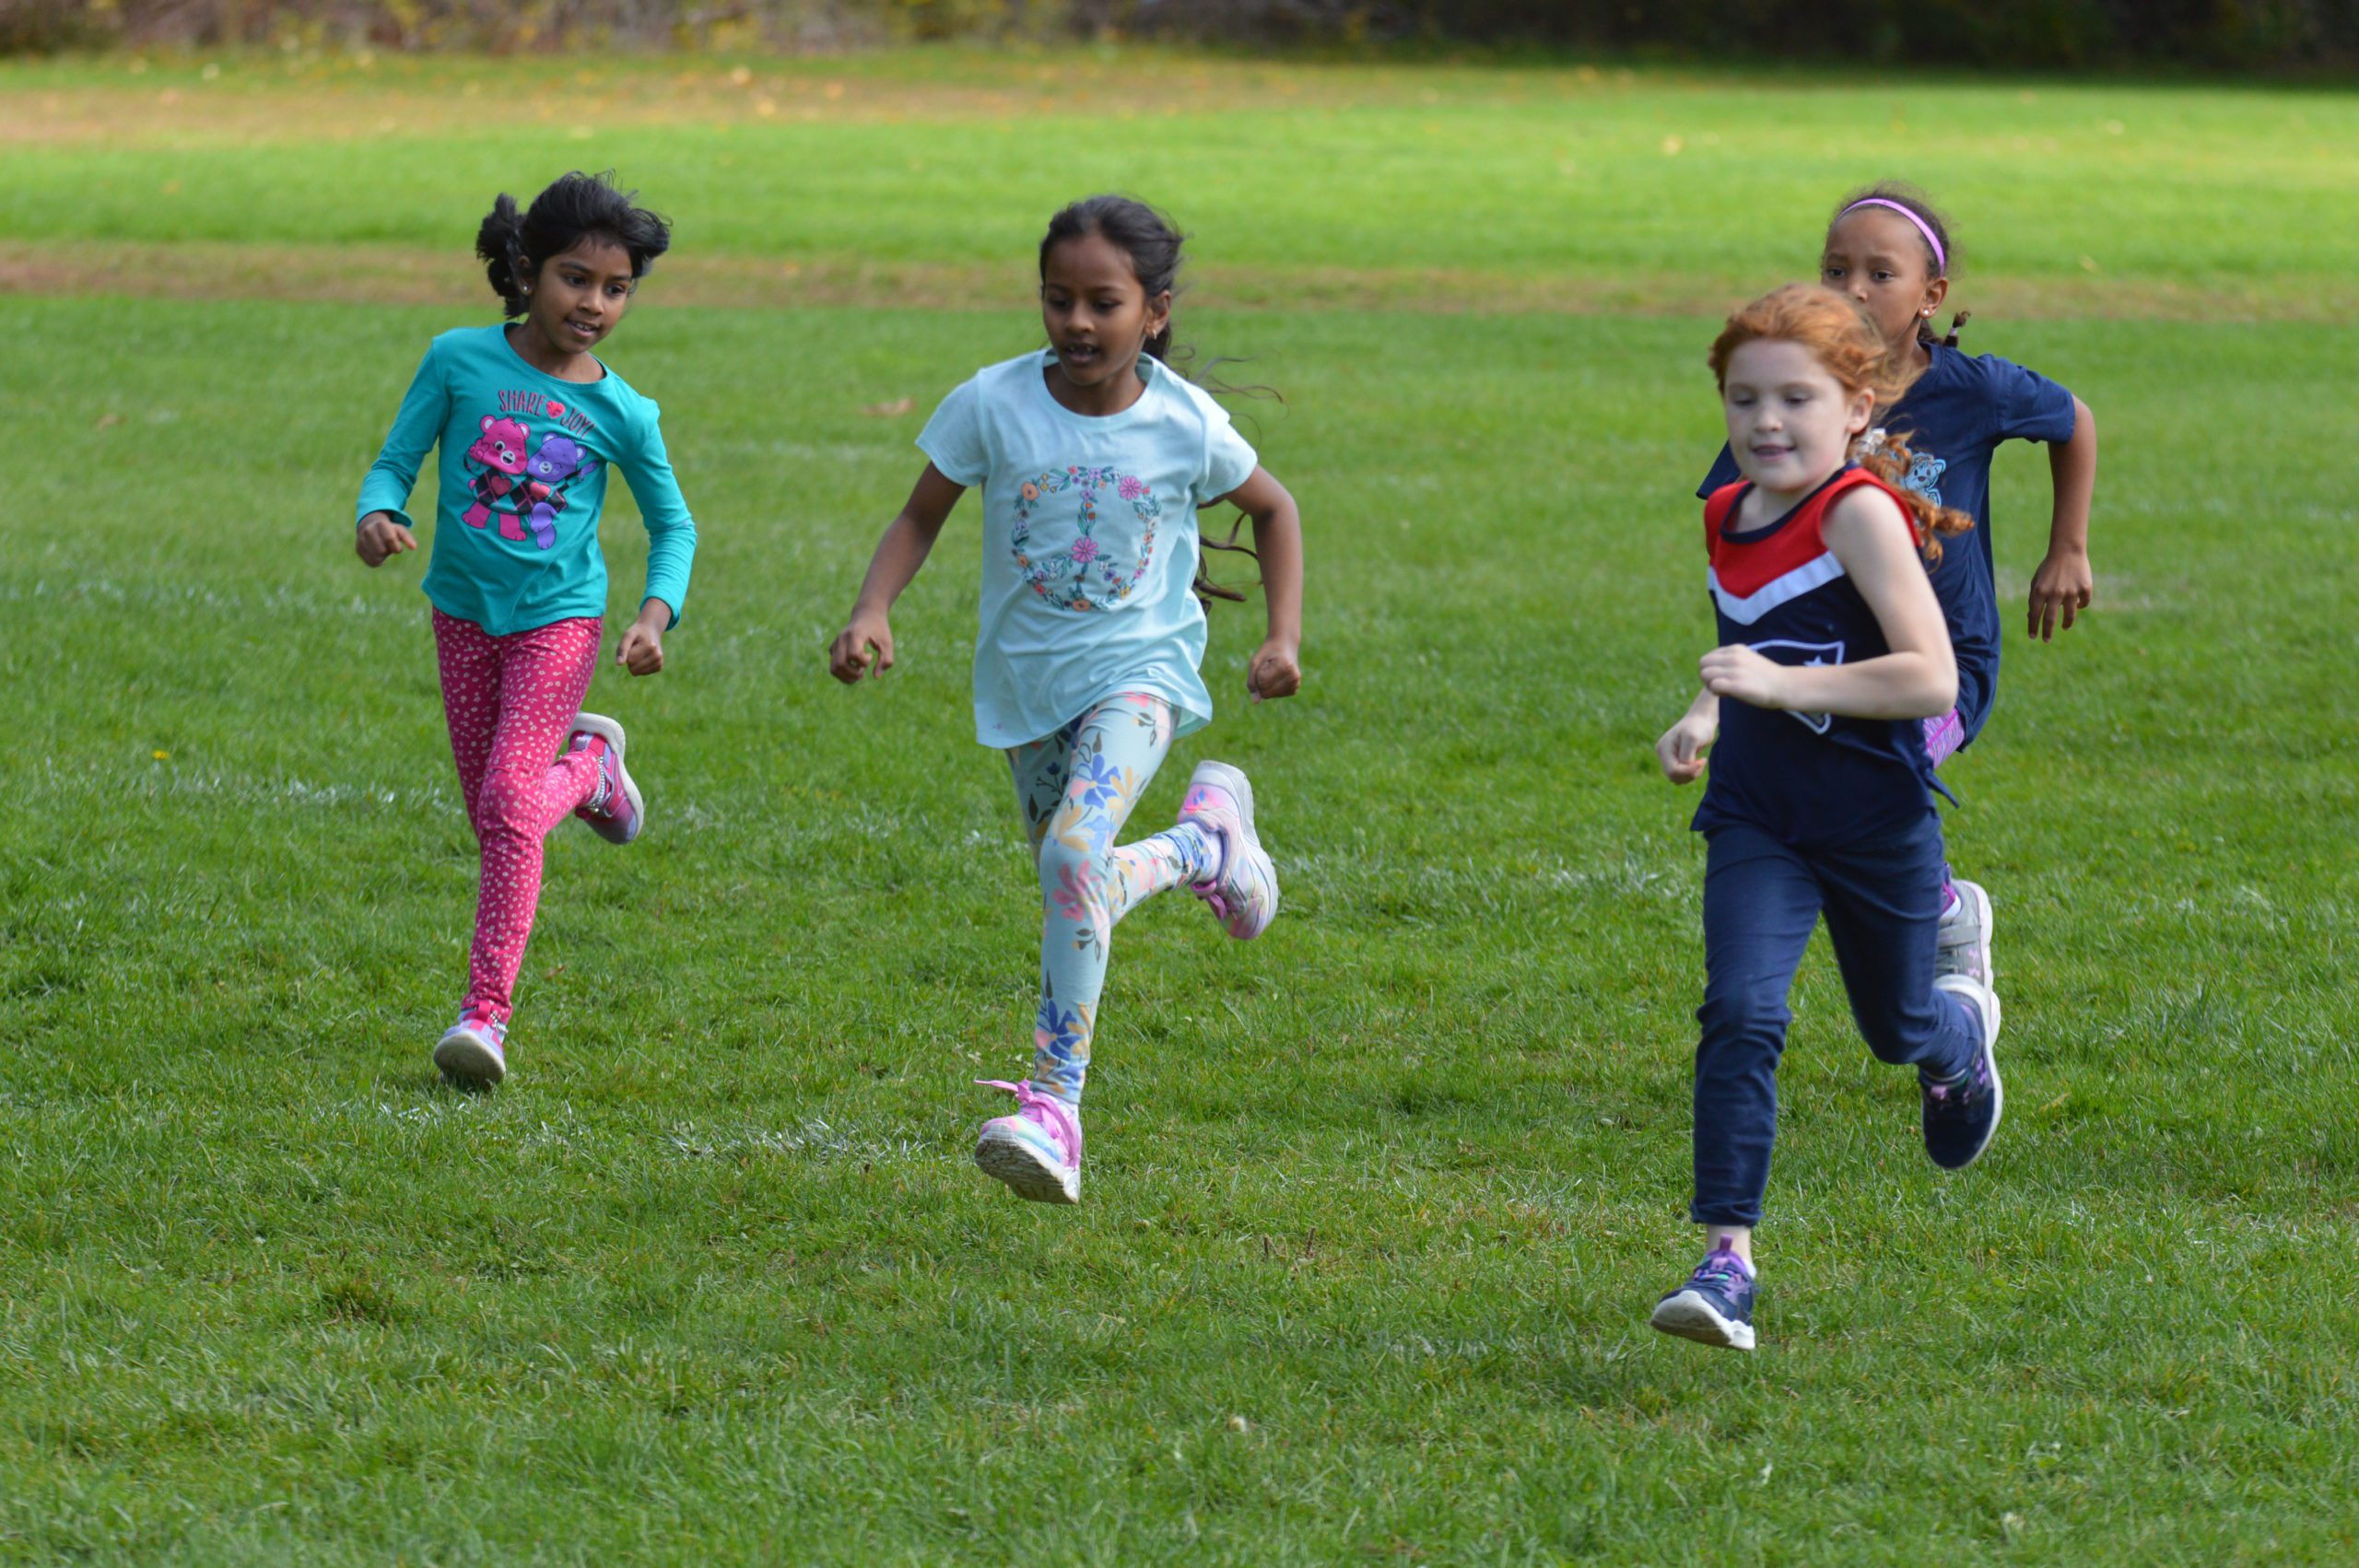 Students participating in the 2022 Genet Fall Fun Run